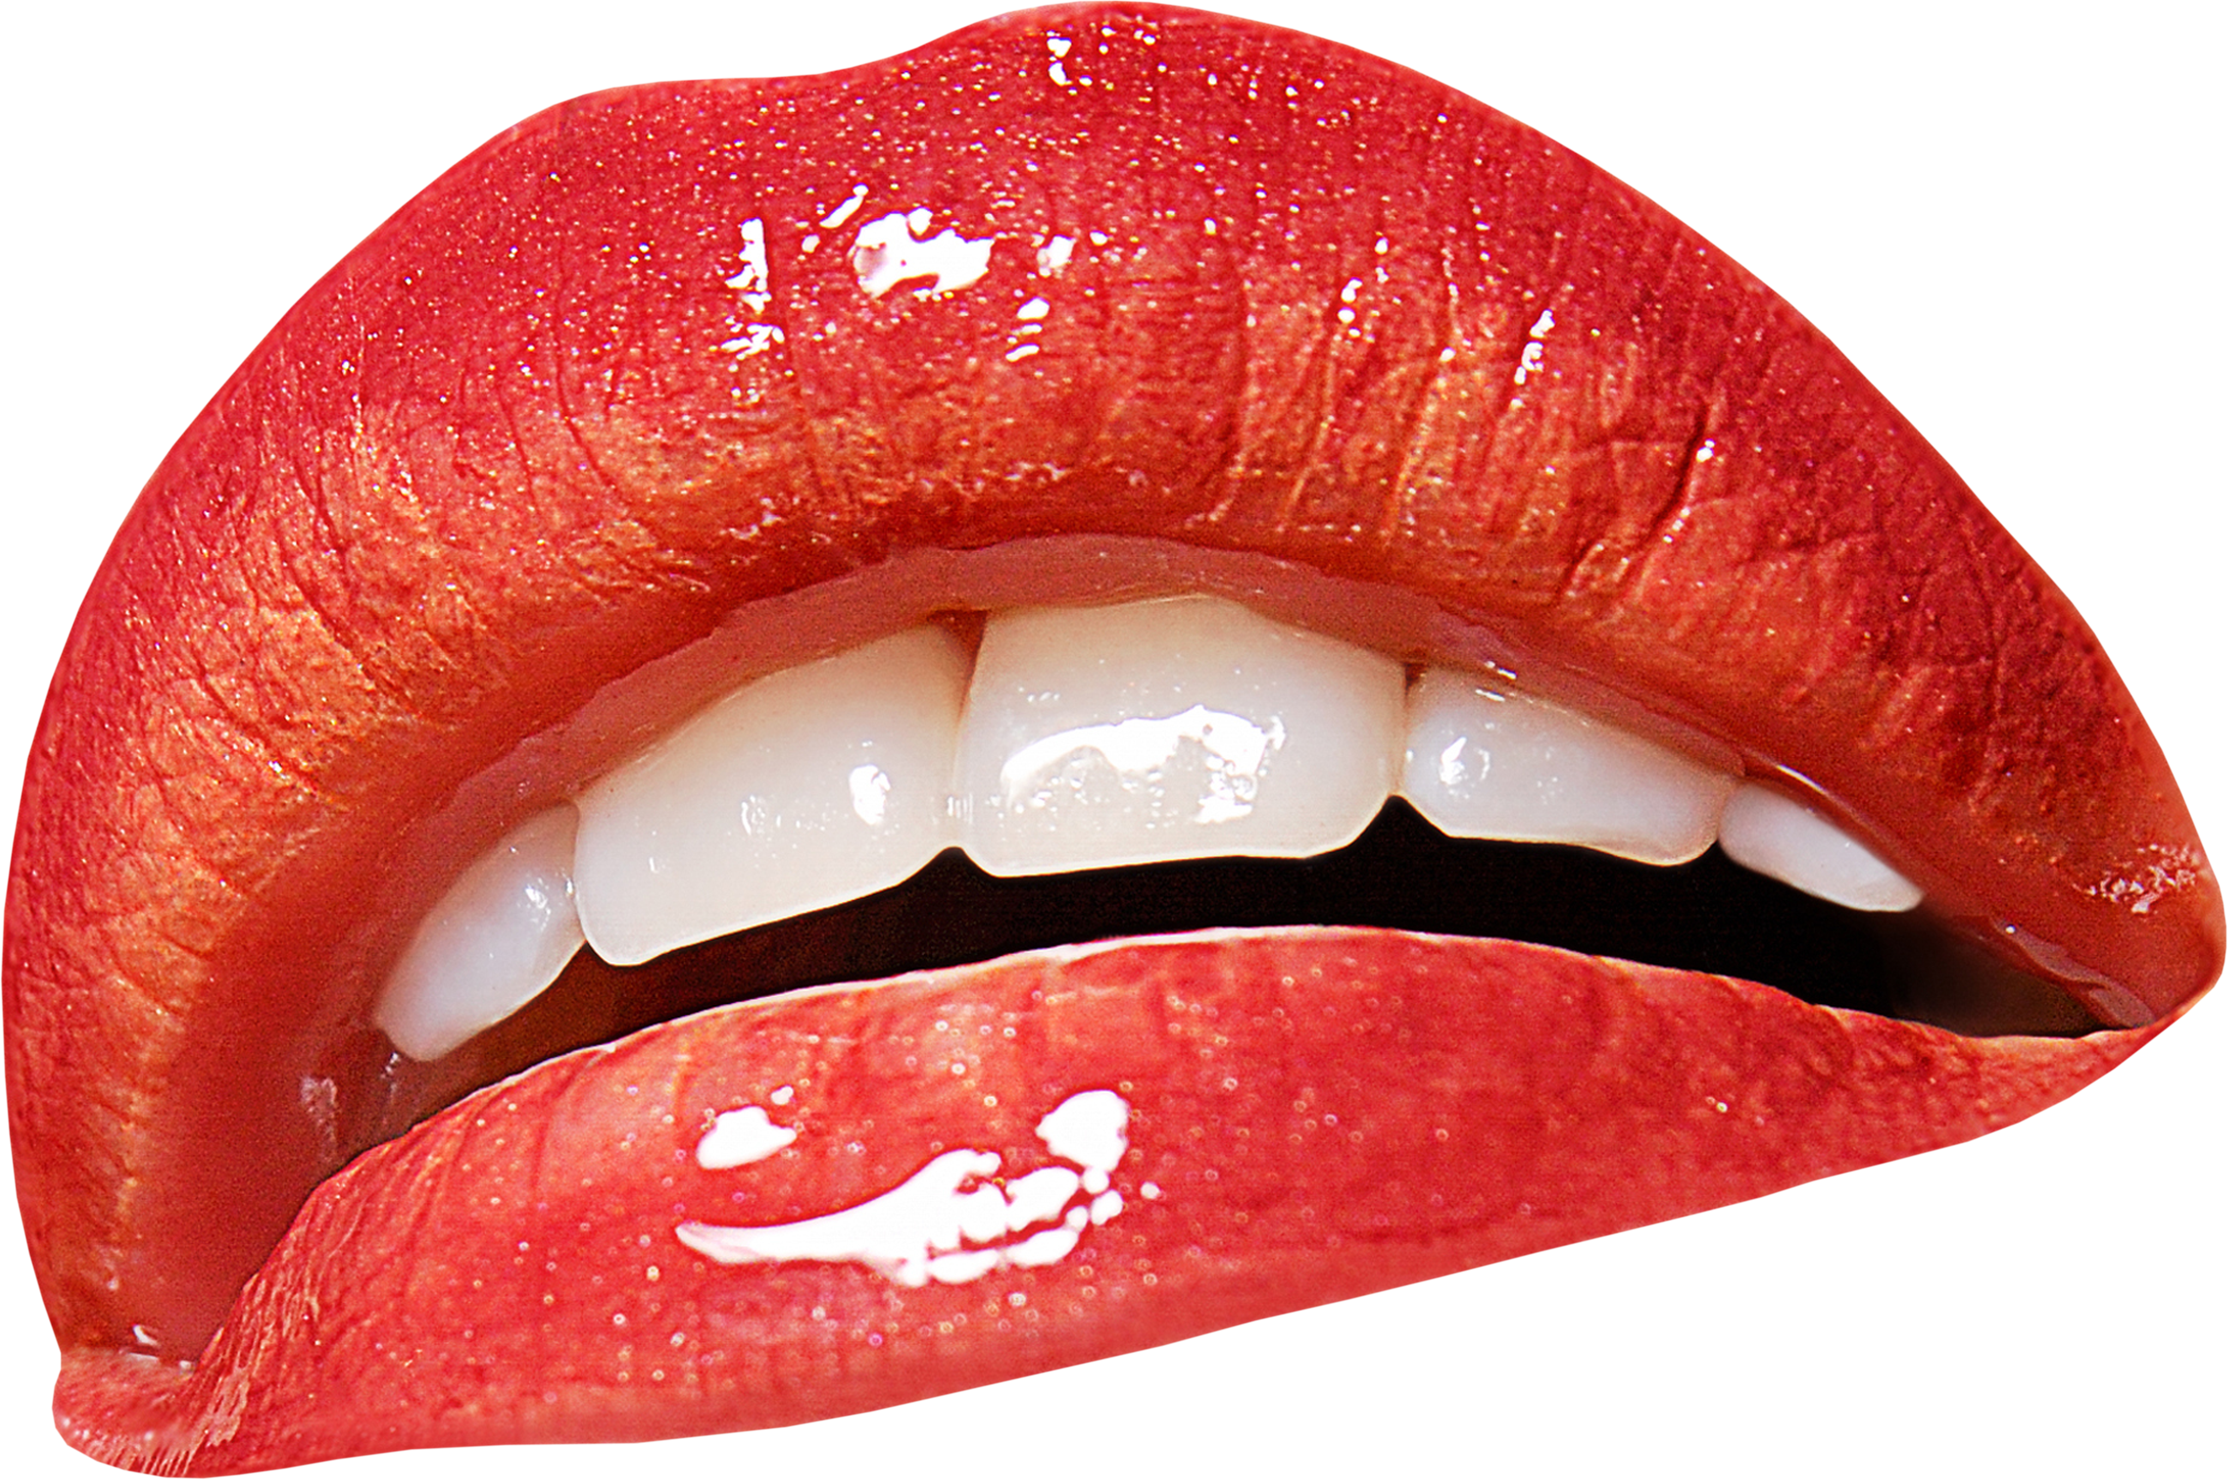 mouth clipart lip style